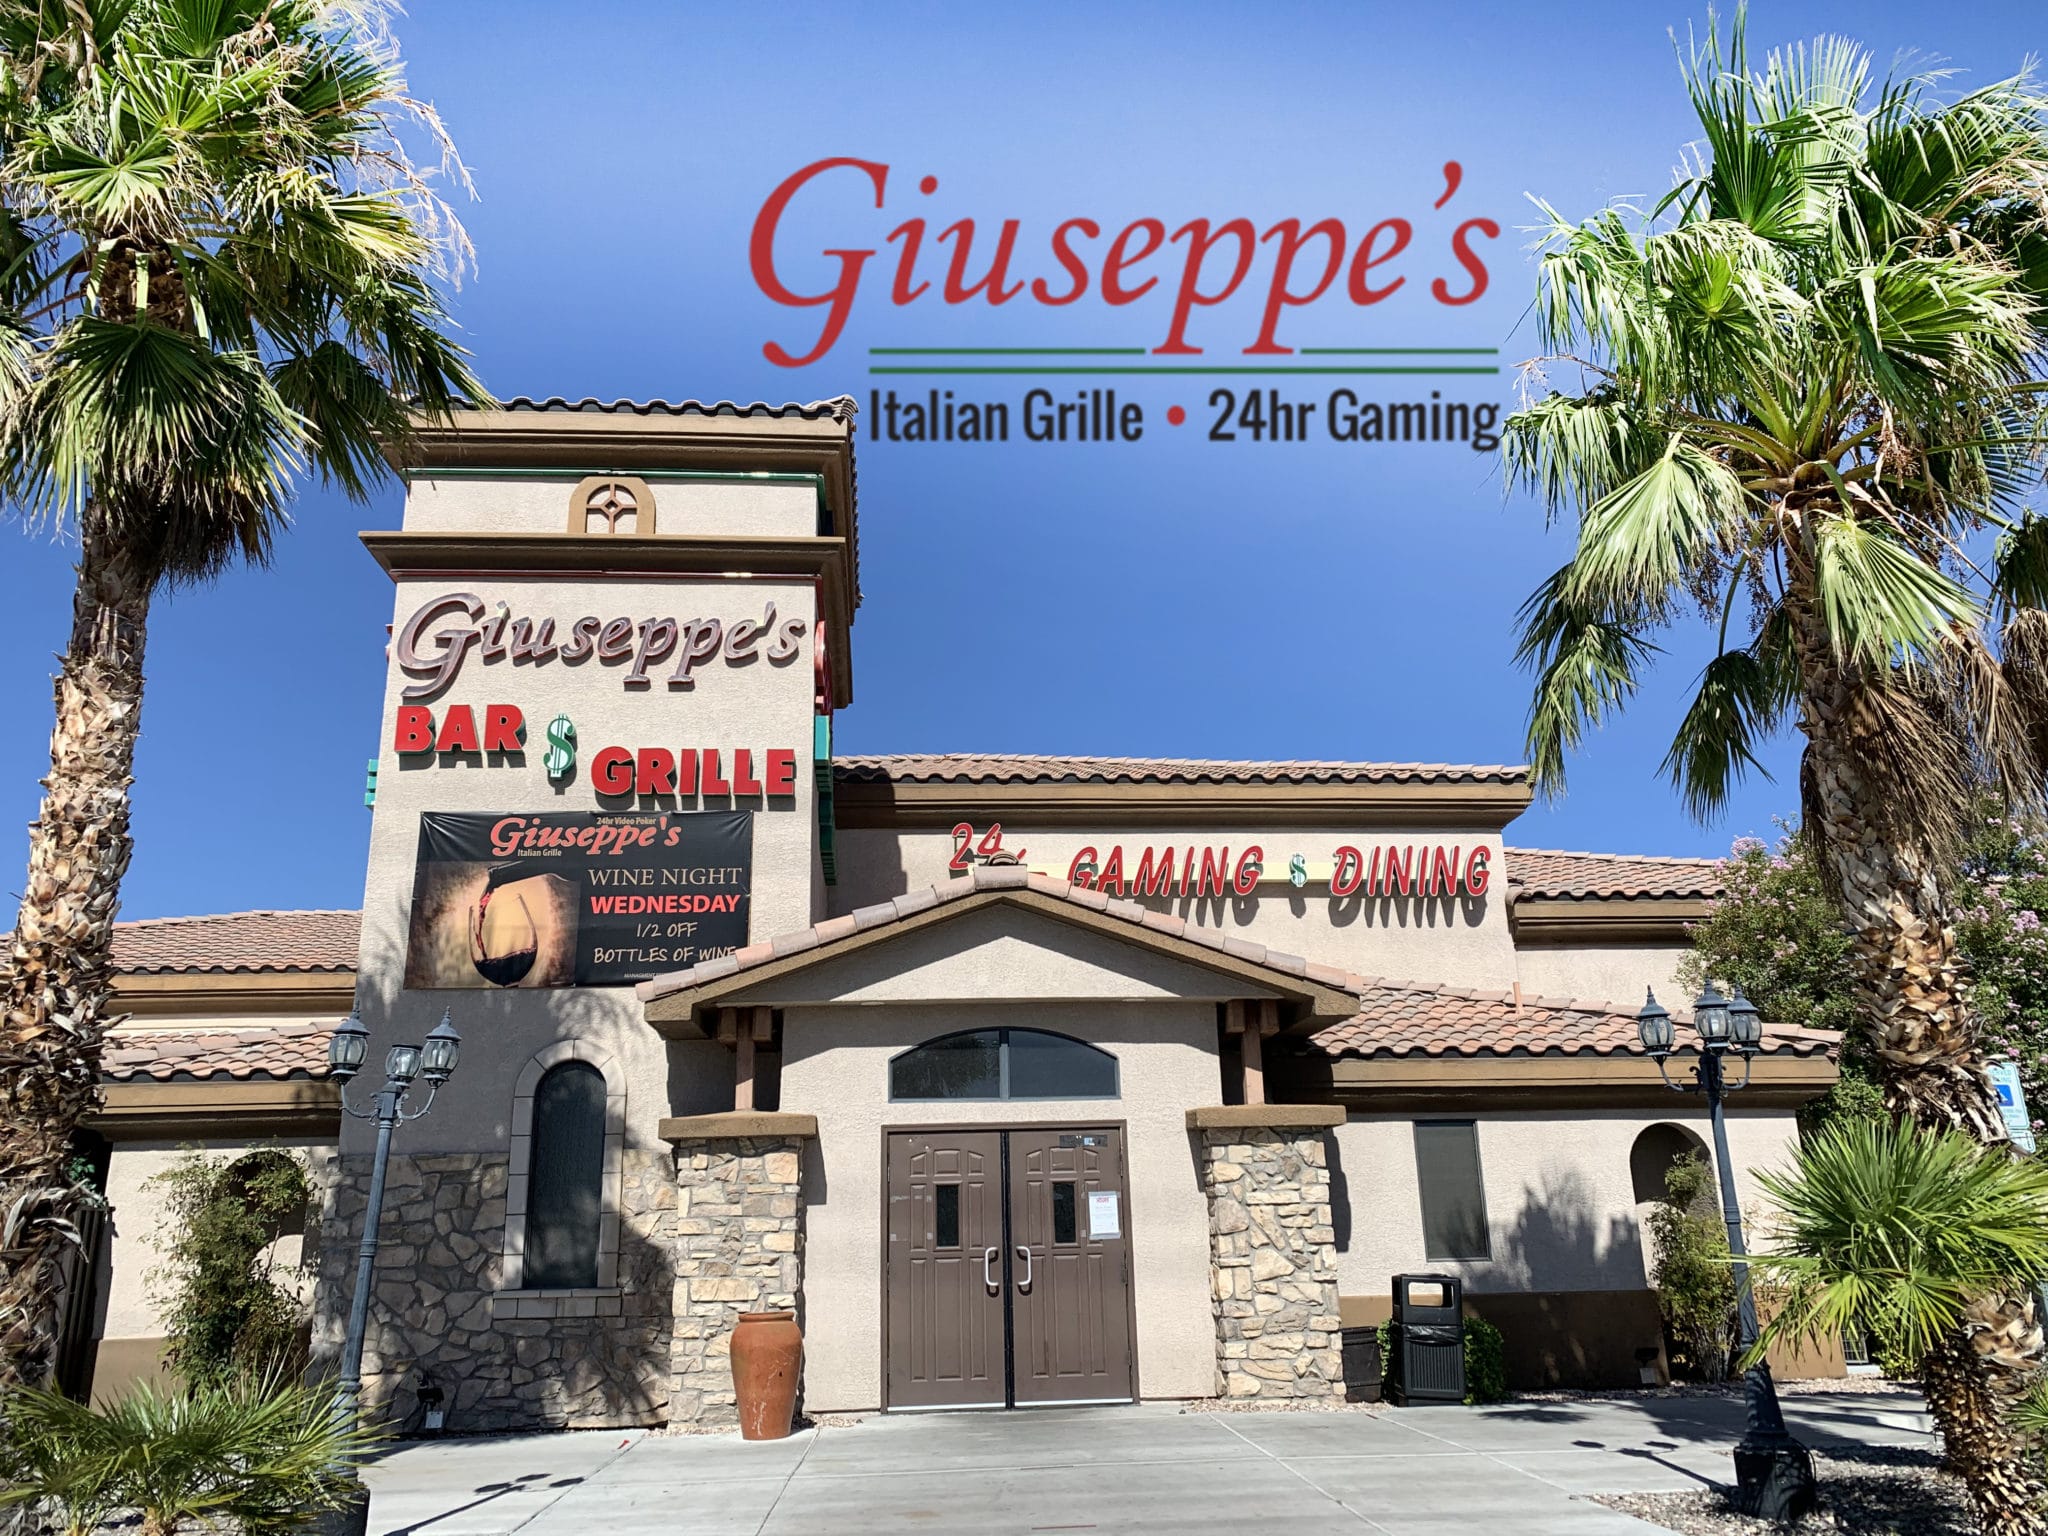 Giuseppe’s Bar and Grille